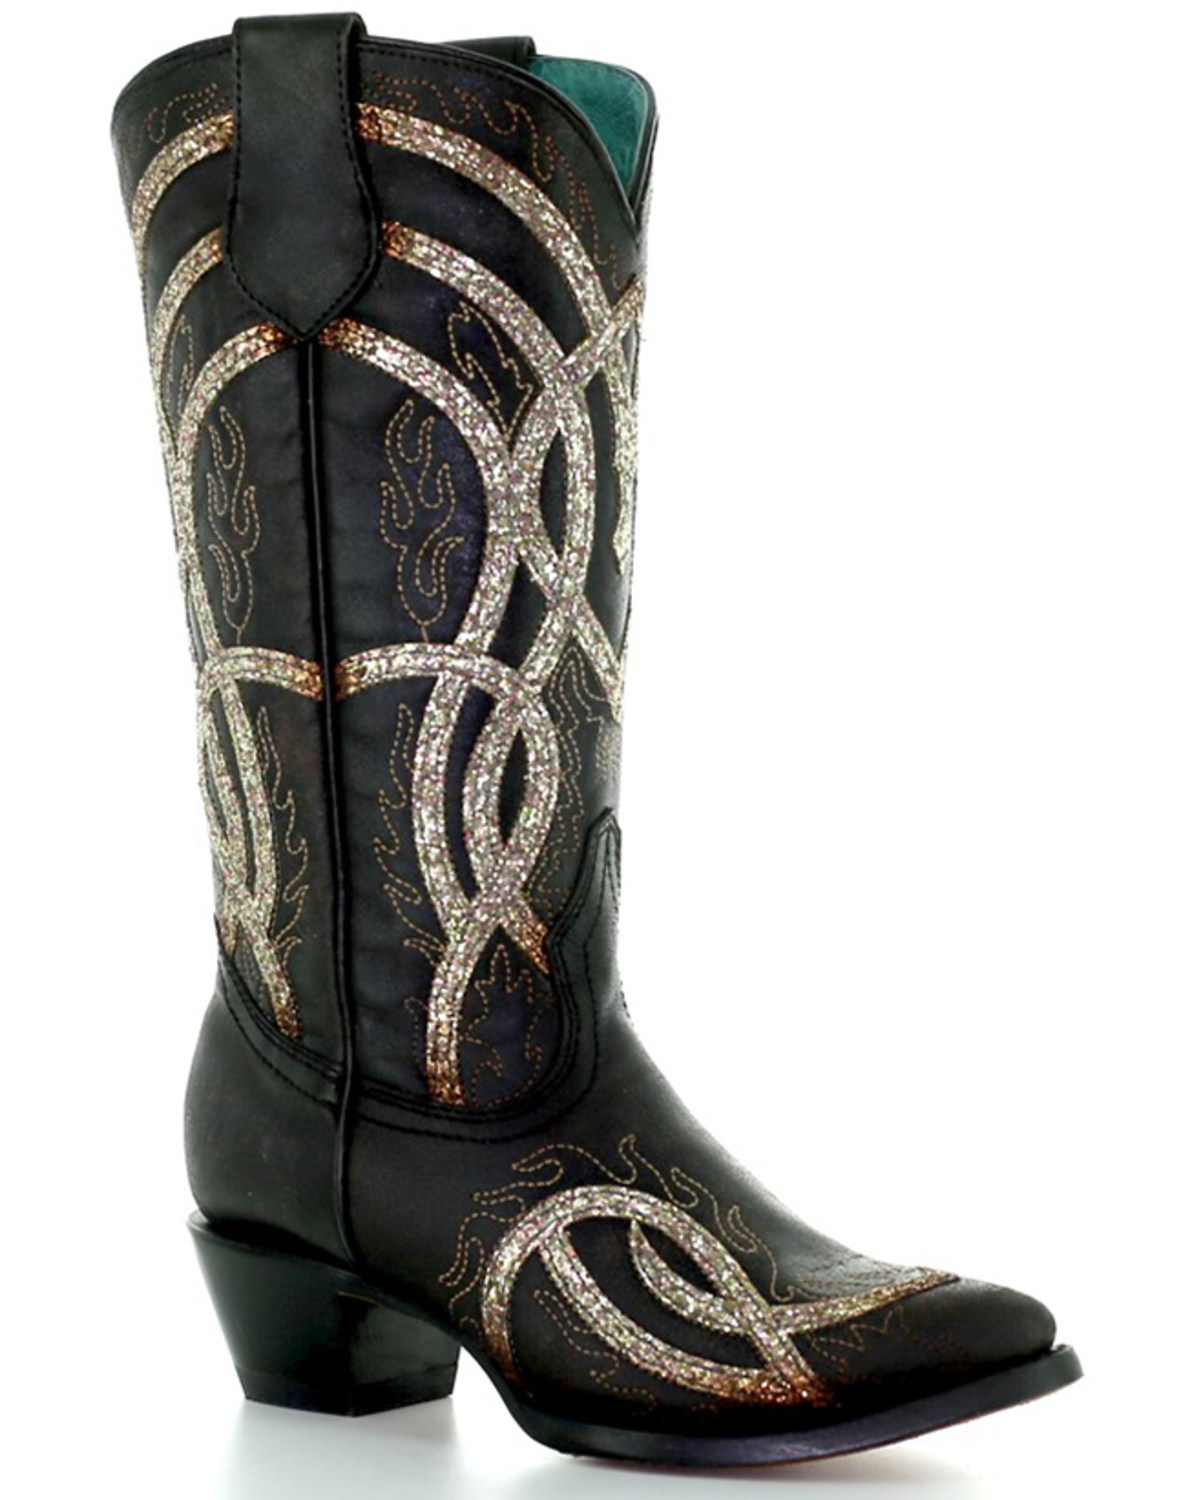 Corral Women's Glitter Overlay Western Boots - Pointed Toe